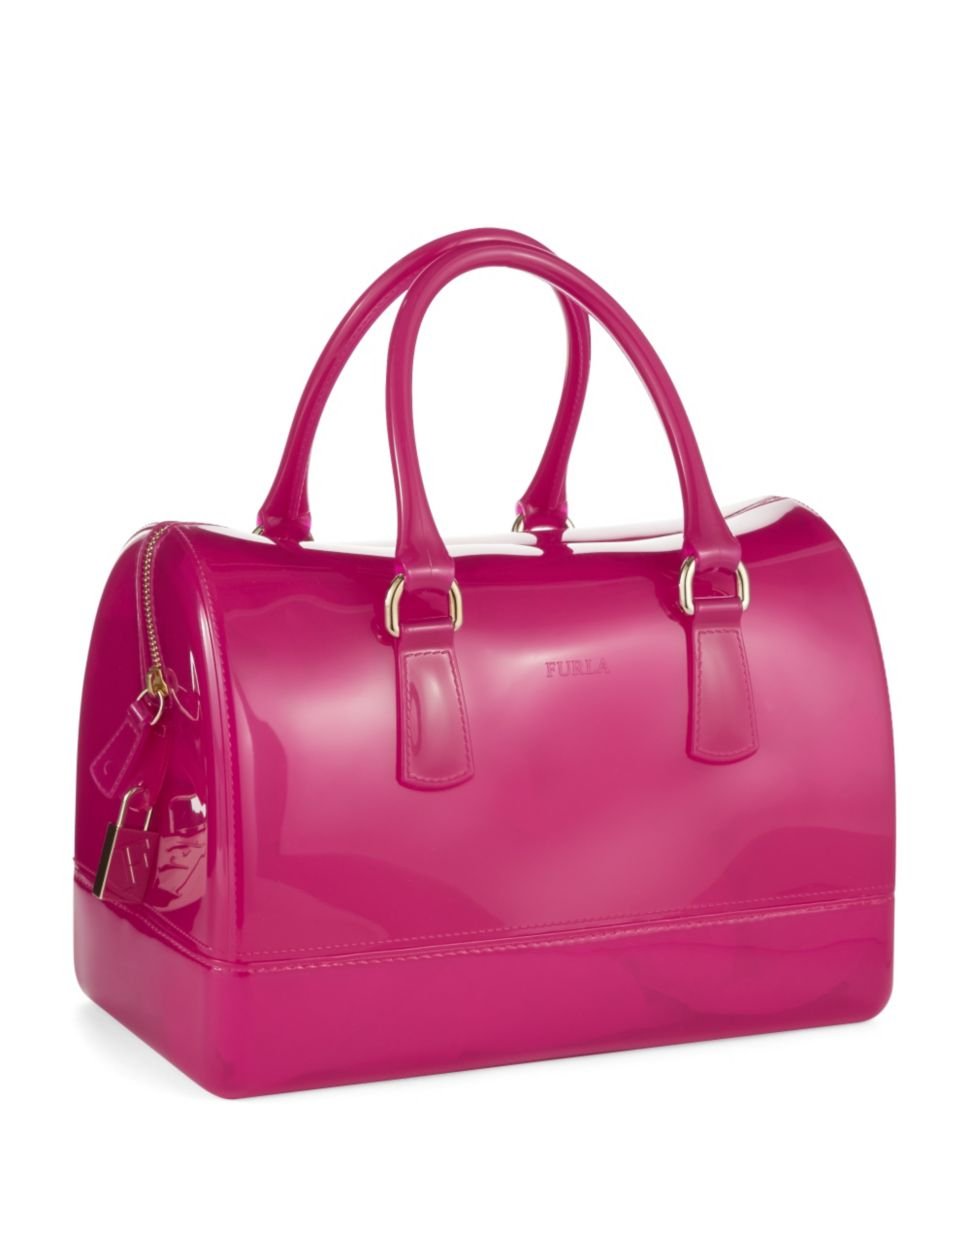 Furla Jelly Backpack. womens,Lady’s Candy Color Jelly Handbag Satchel ...